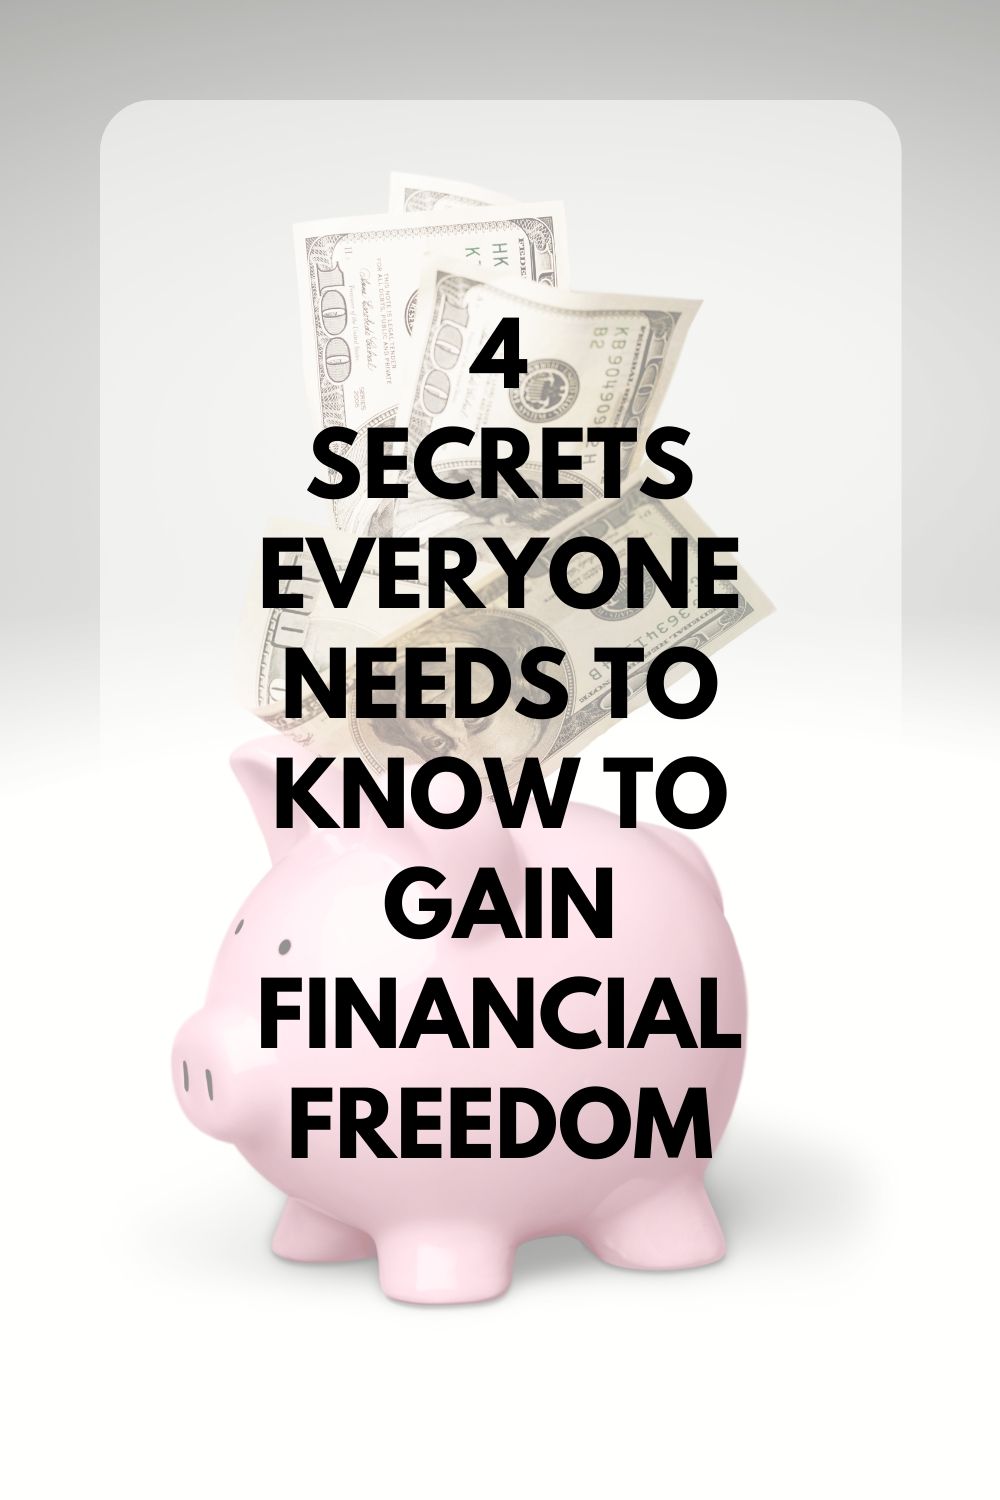 4 Secrets Everyone Needs to Know to Gain Financial Freedom